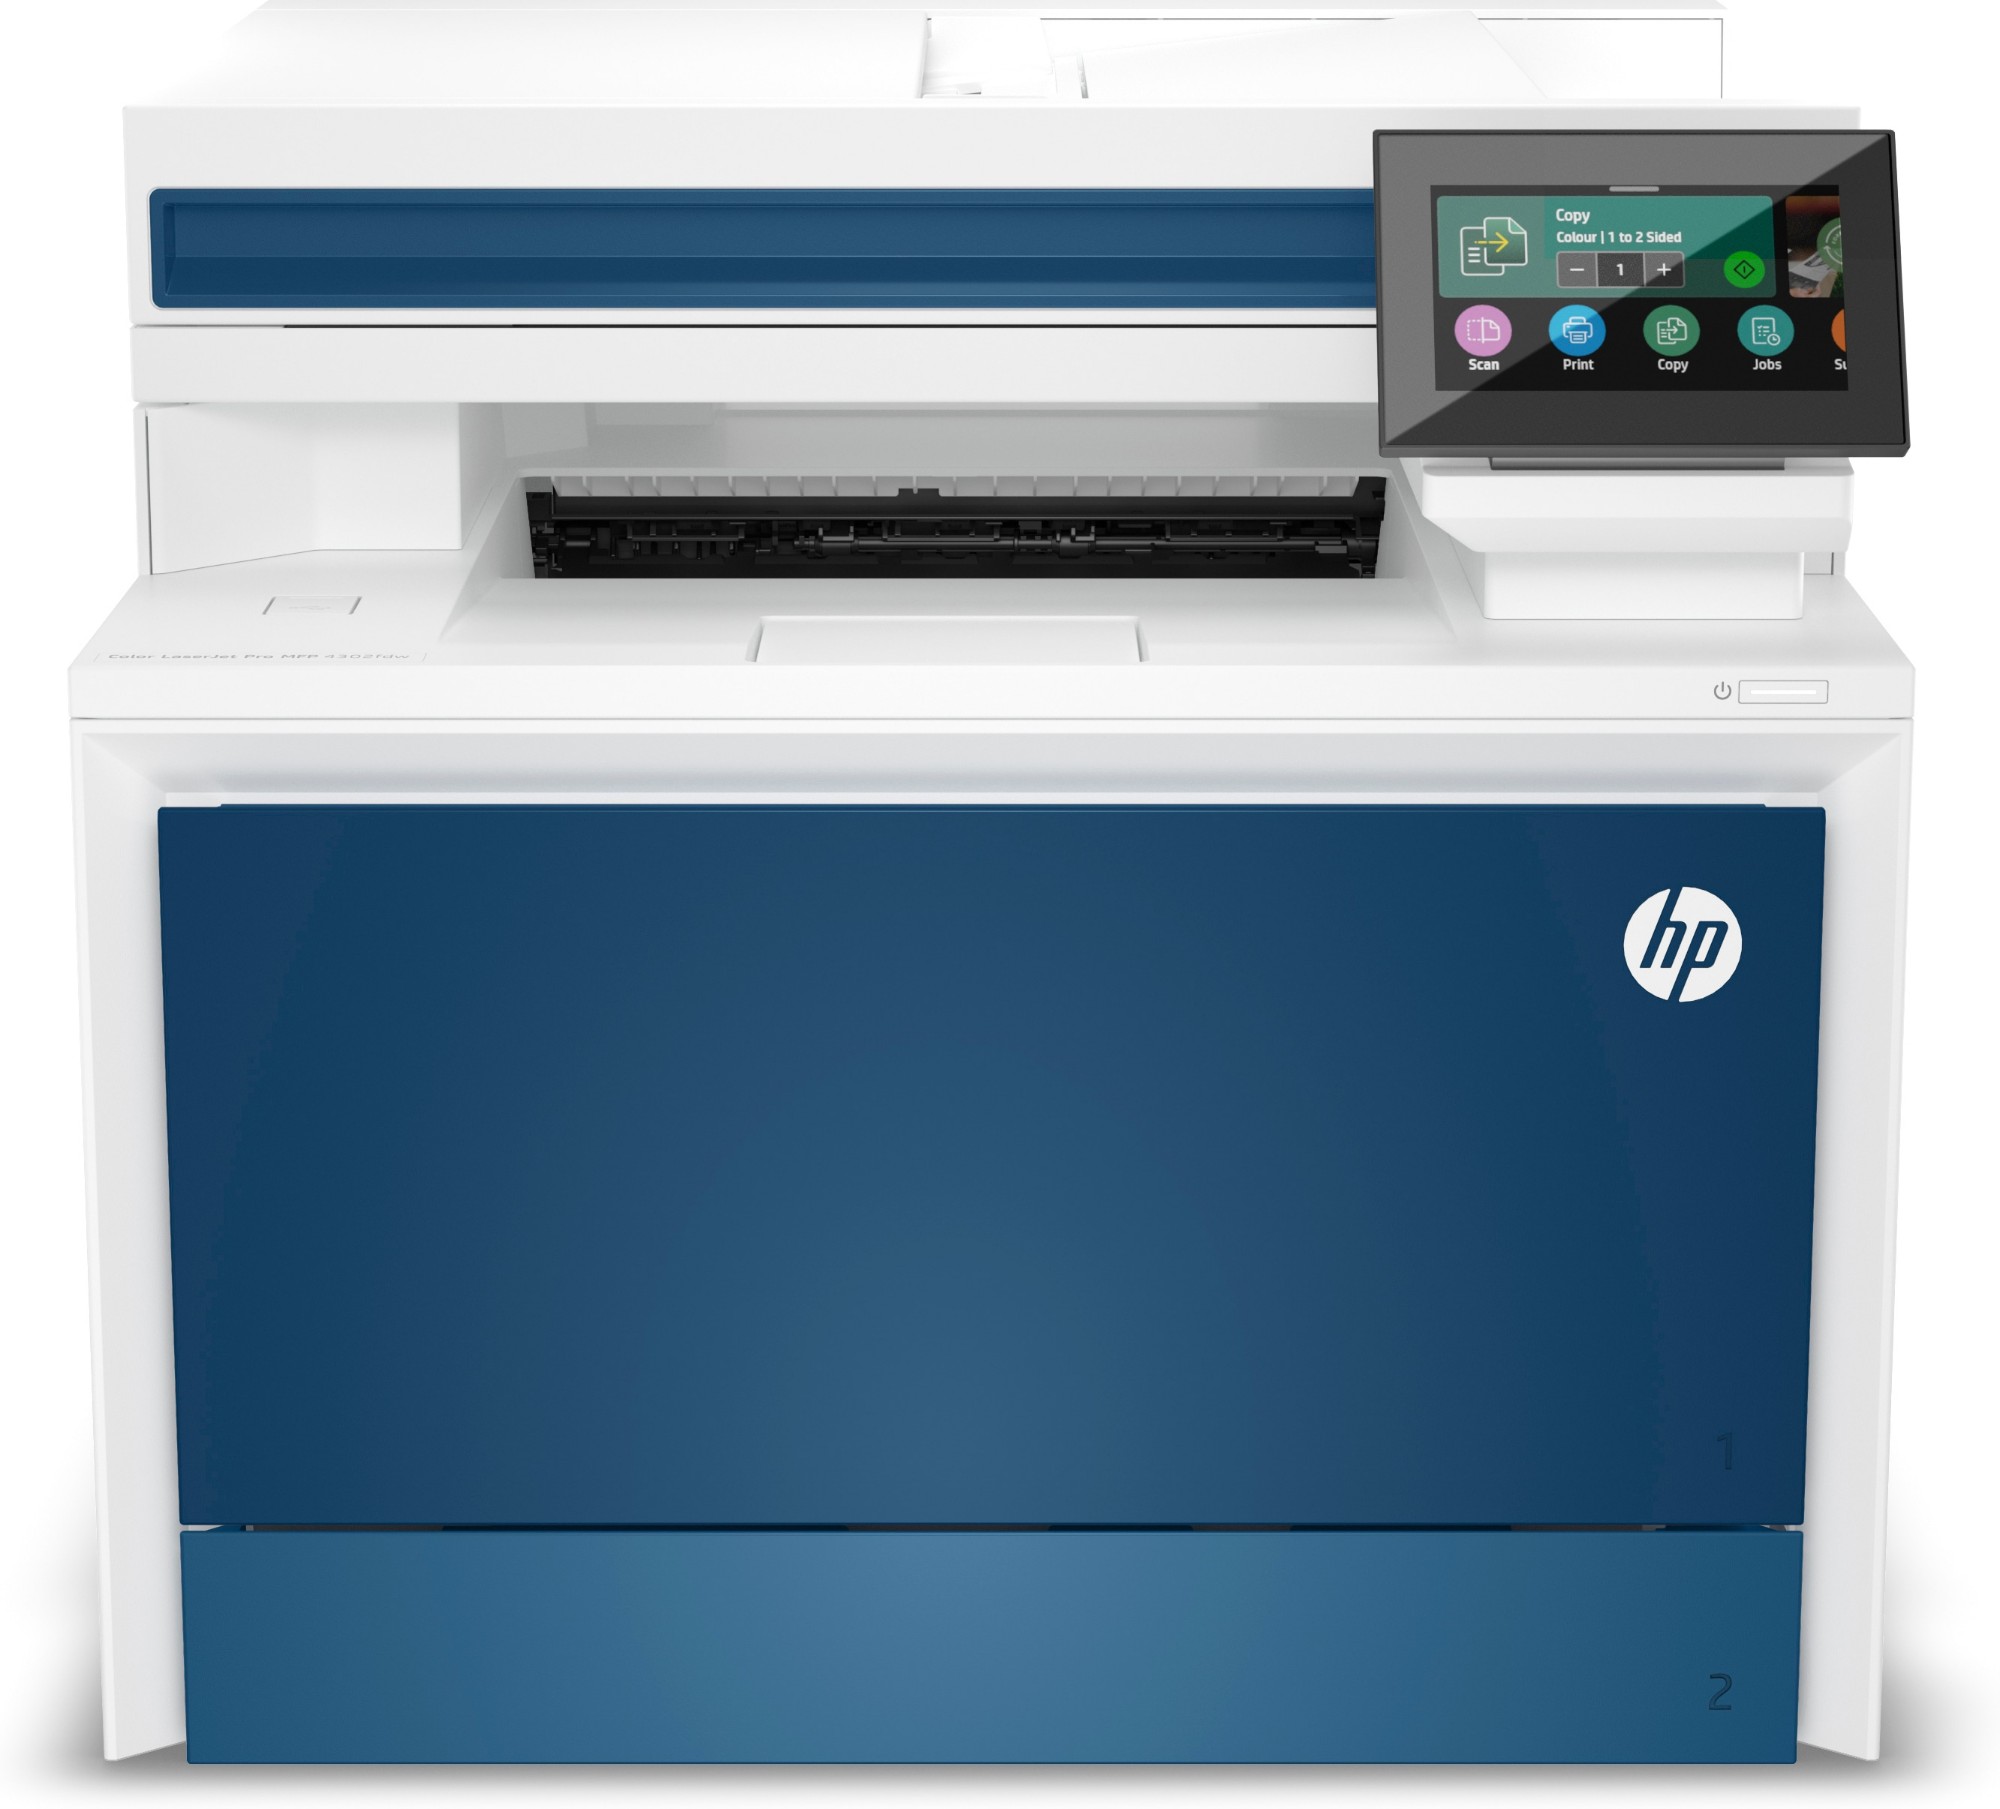 HP Colour LaserJet Pro MFP 4302fdw Printer, Colour, Printer for Small medium business, Print, copy, scan, fax, Wireless; Print from phone or tablet; Automatic document feeder